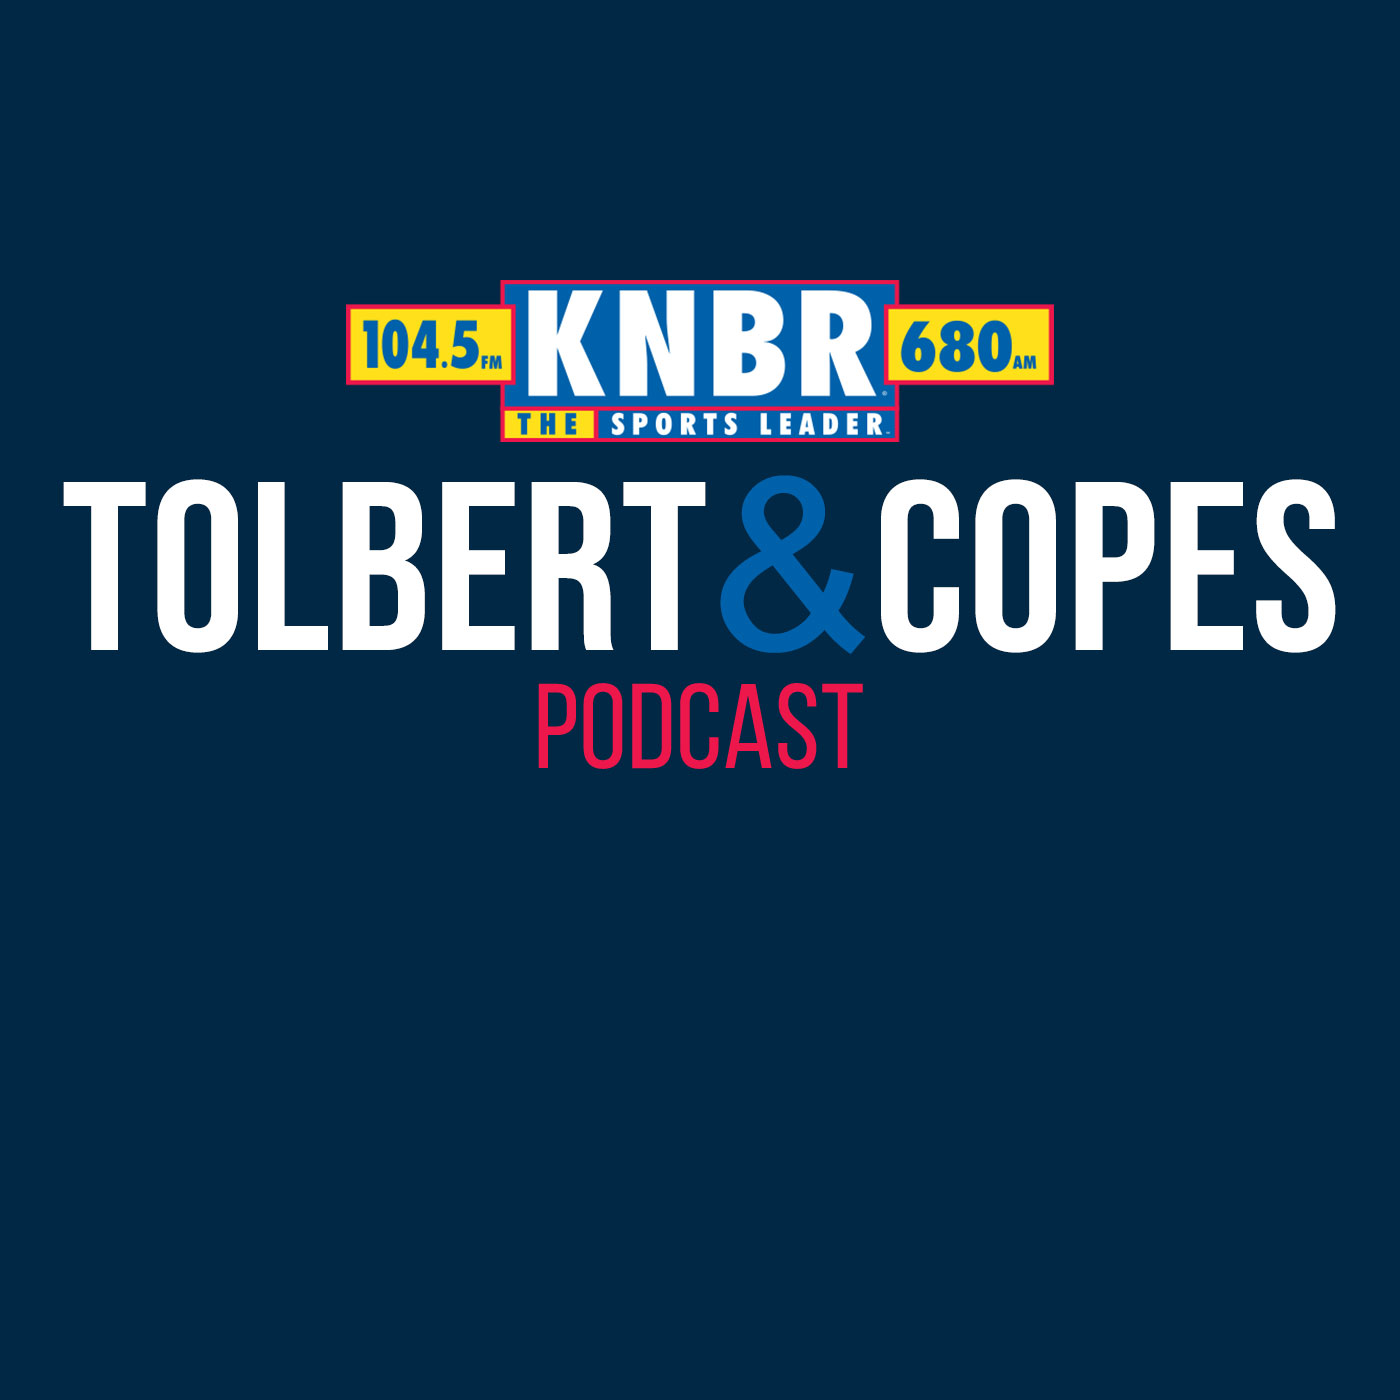 7-29 Andrew Baggarly joins Tolbert & Copes and talks through what the Giants can do at the trade deadline, focusing on Blake Snell and Robbie Ray, as well as discussing impact of young players like Tyler Fitzgerald and Heliot Ramos